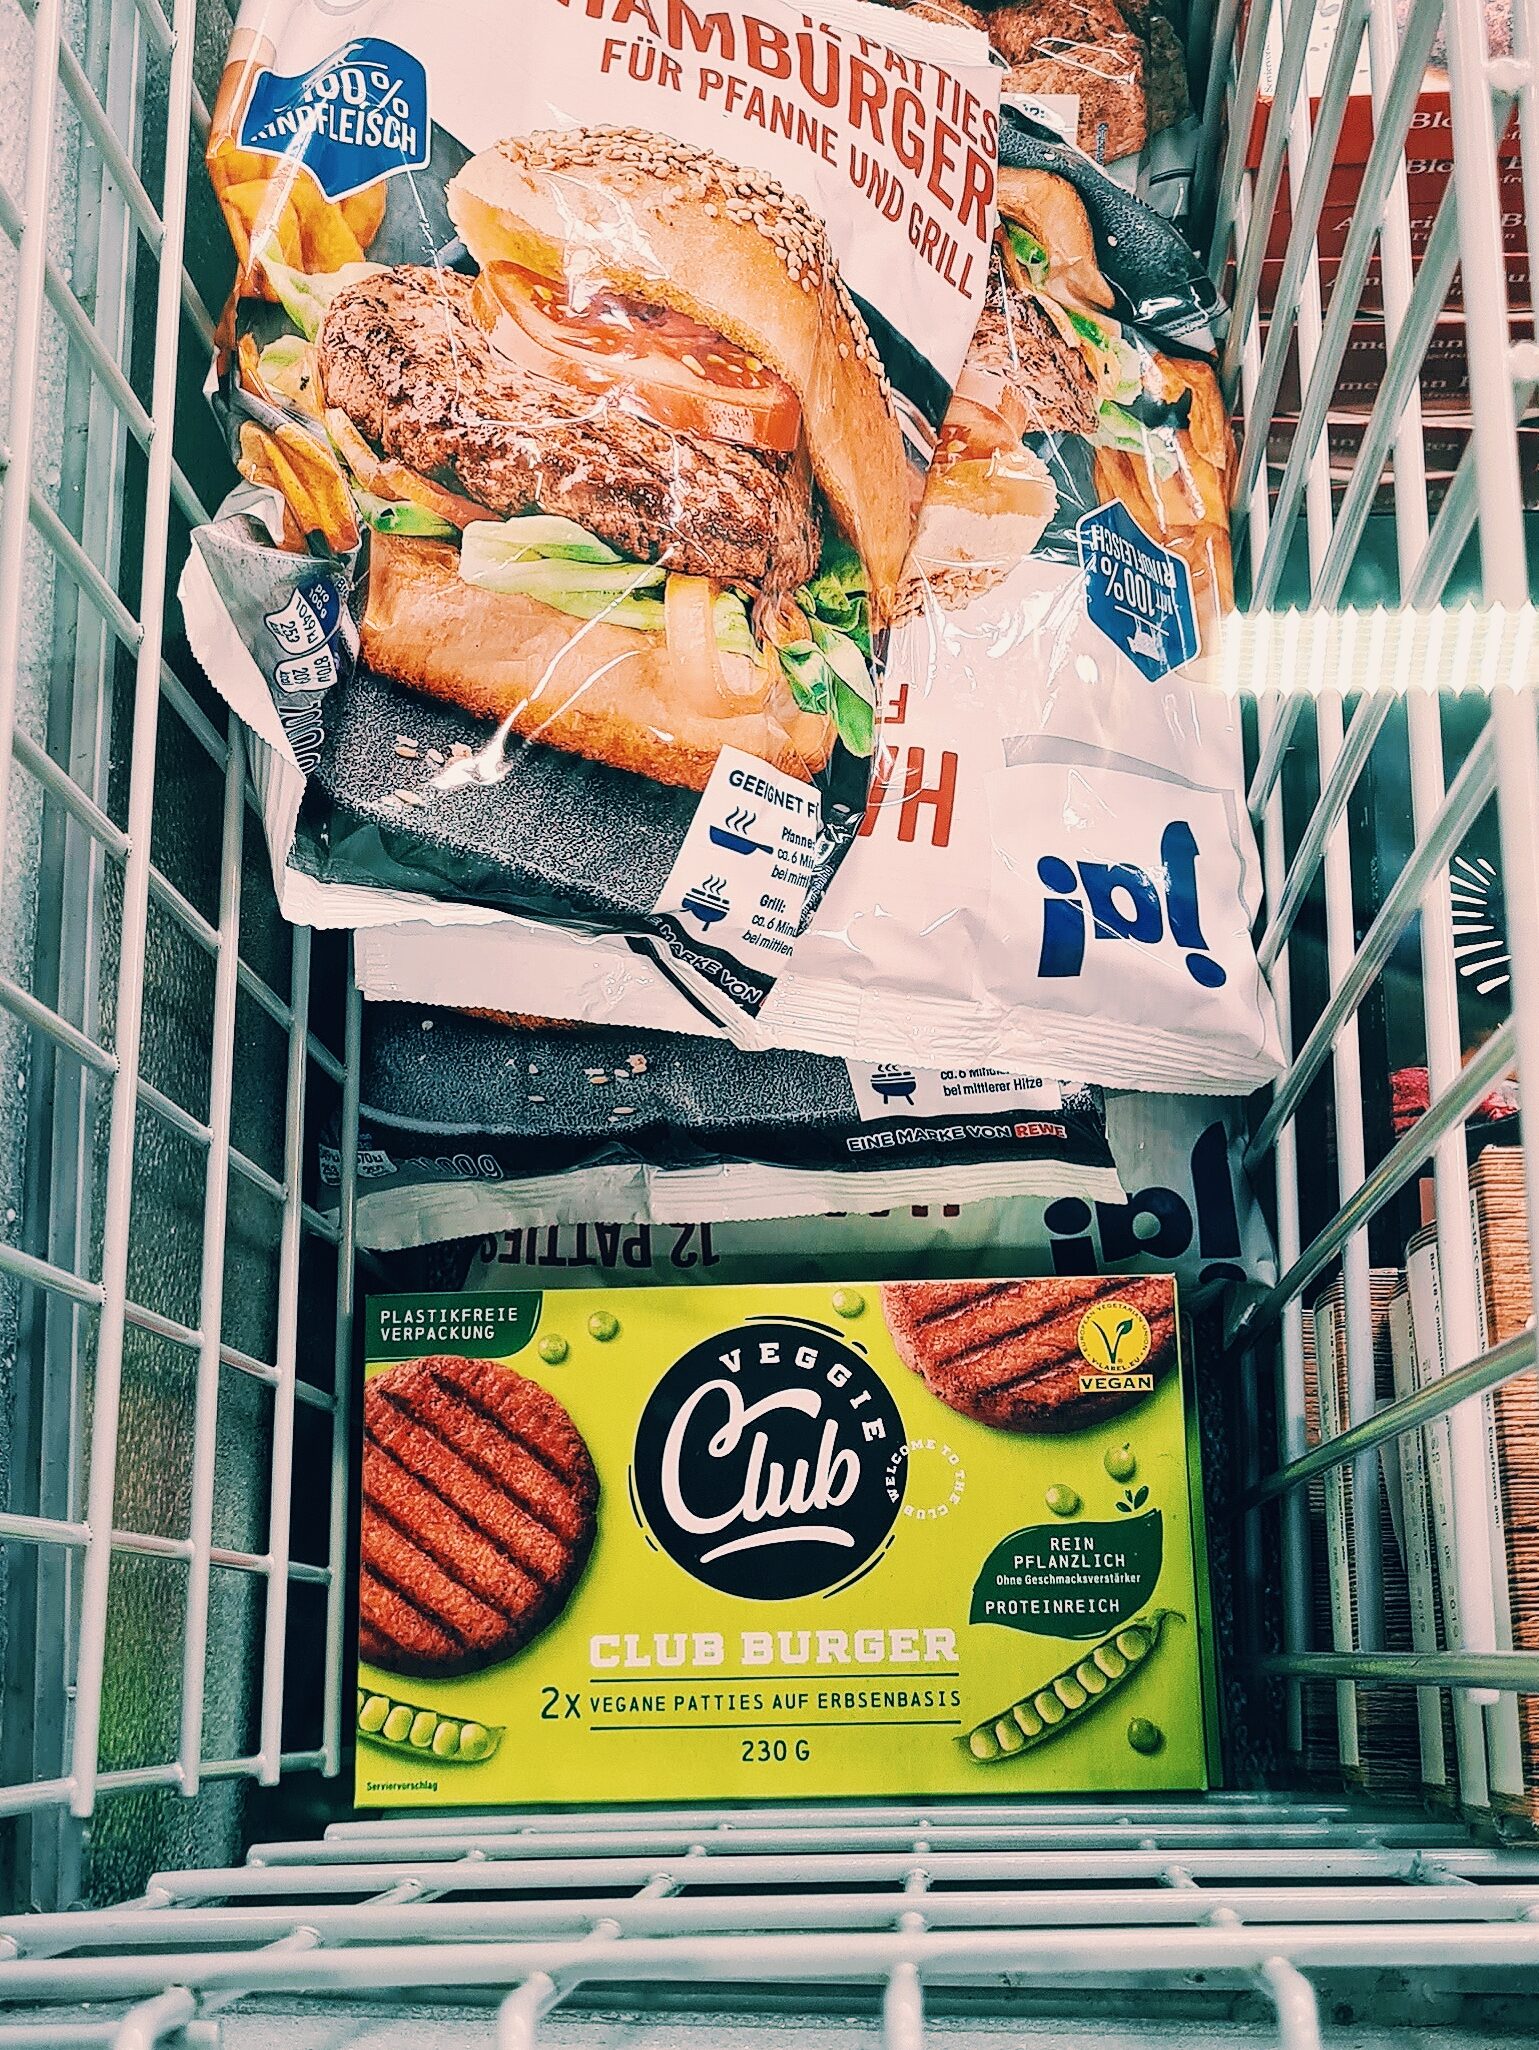 A photo of the meat-free burgers next to meat burgers in the frozen section of a supermarket.